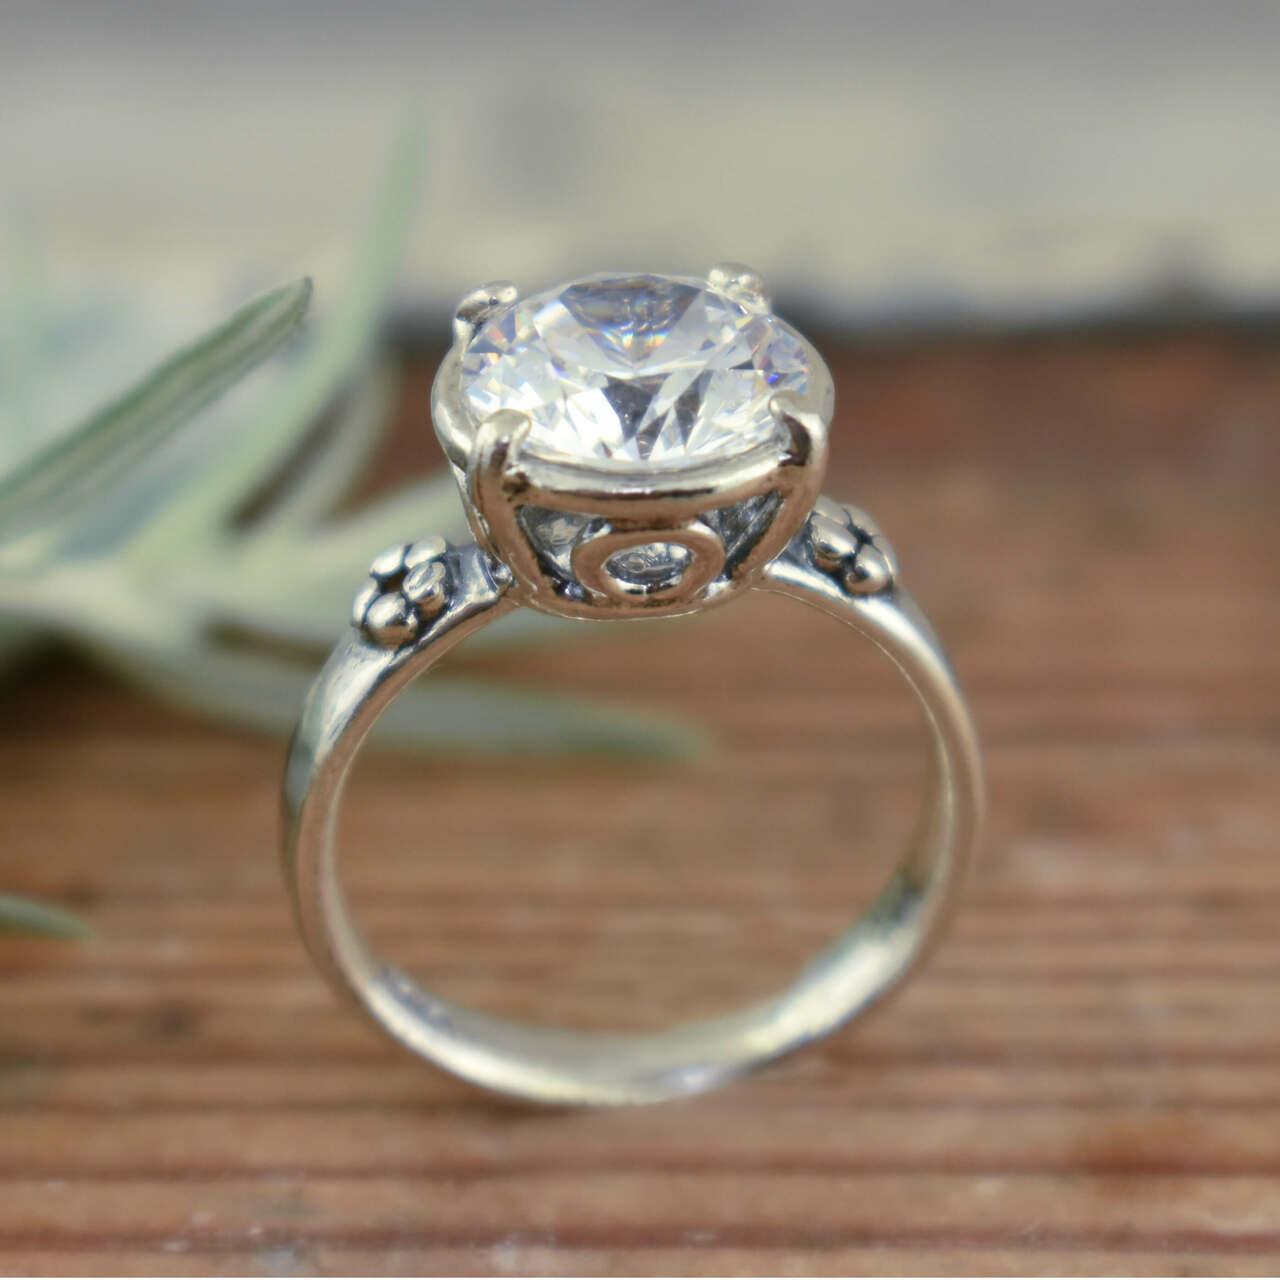 Handcrafted sterling silver ring with large cz stone